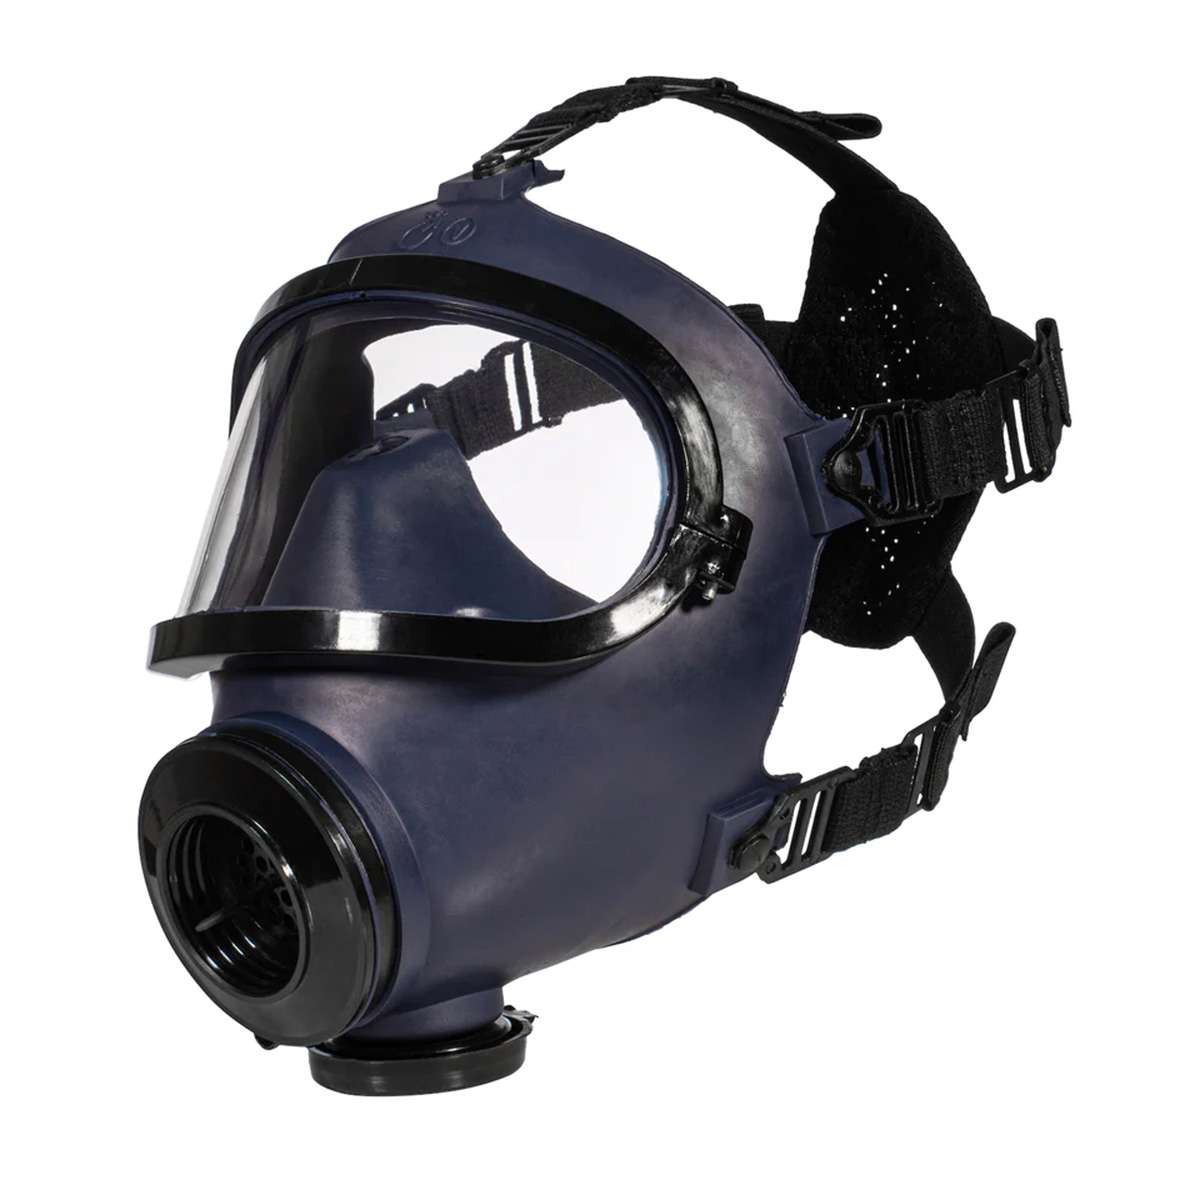 MIRA Safety MD-1 Children's Gas Mask - Full-Face Protective Respirator